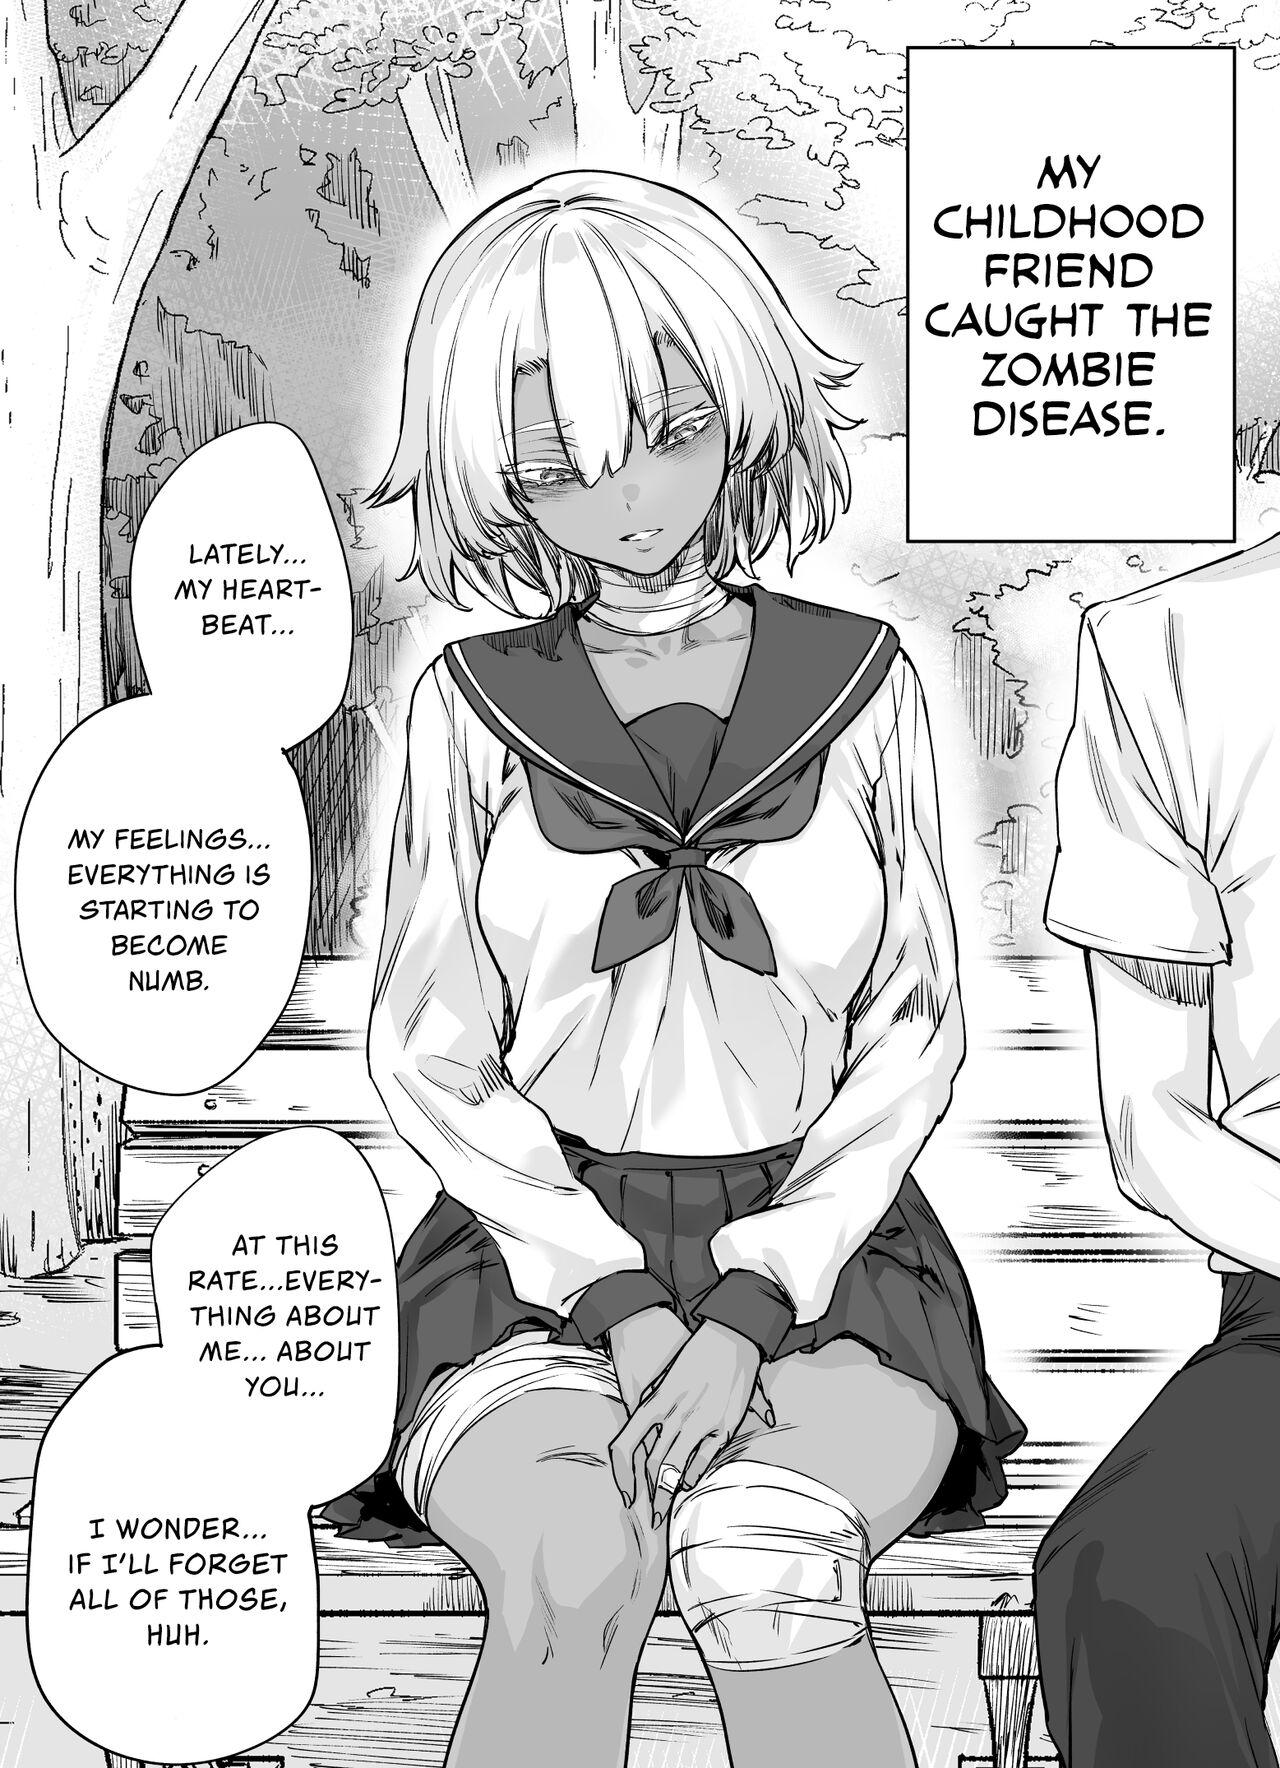 A Manga About Teaching My Zombie Childhood Friend The Real Feeling of Sex 0